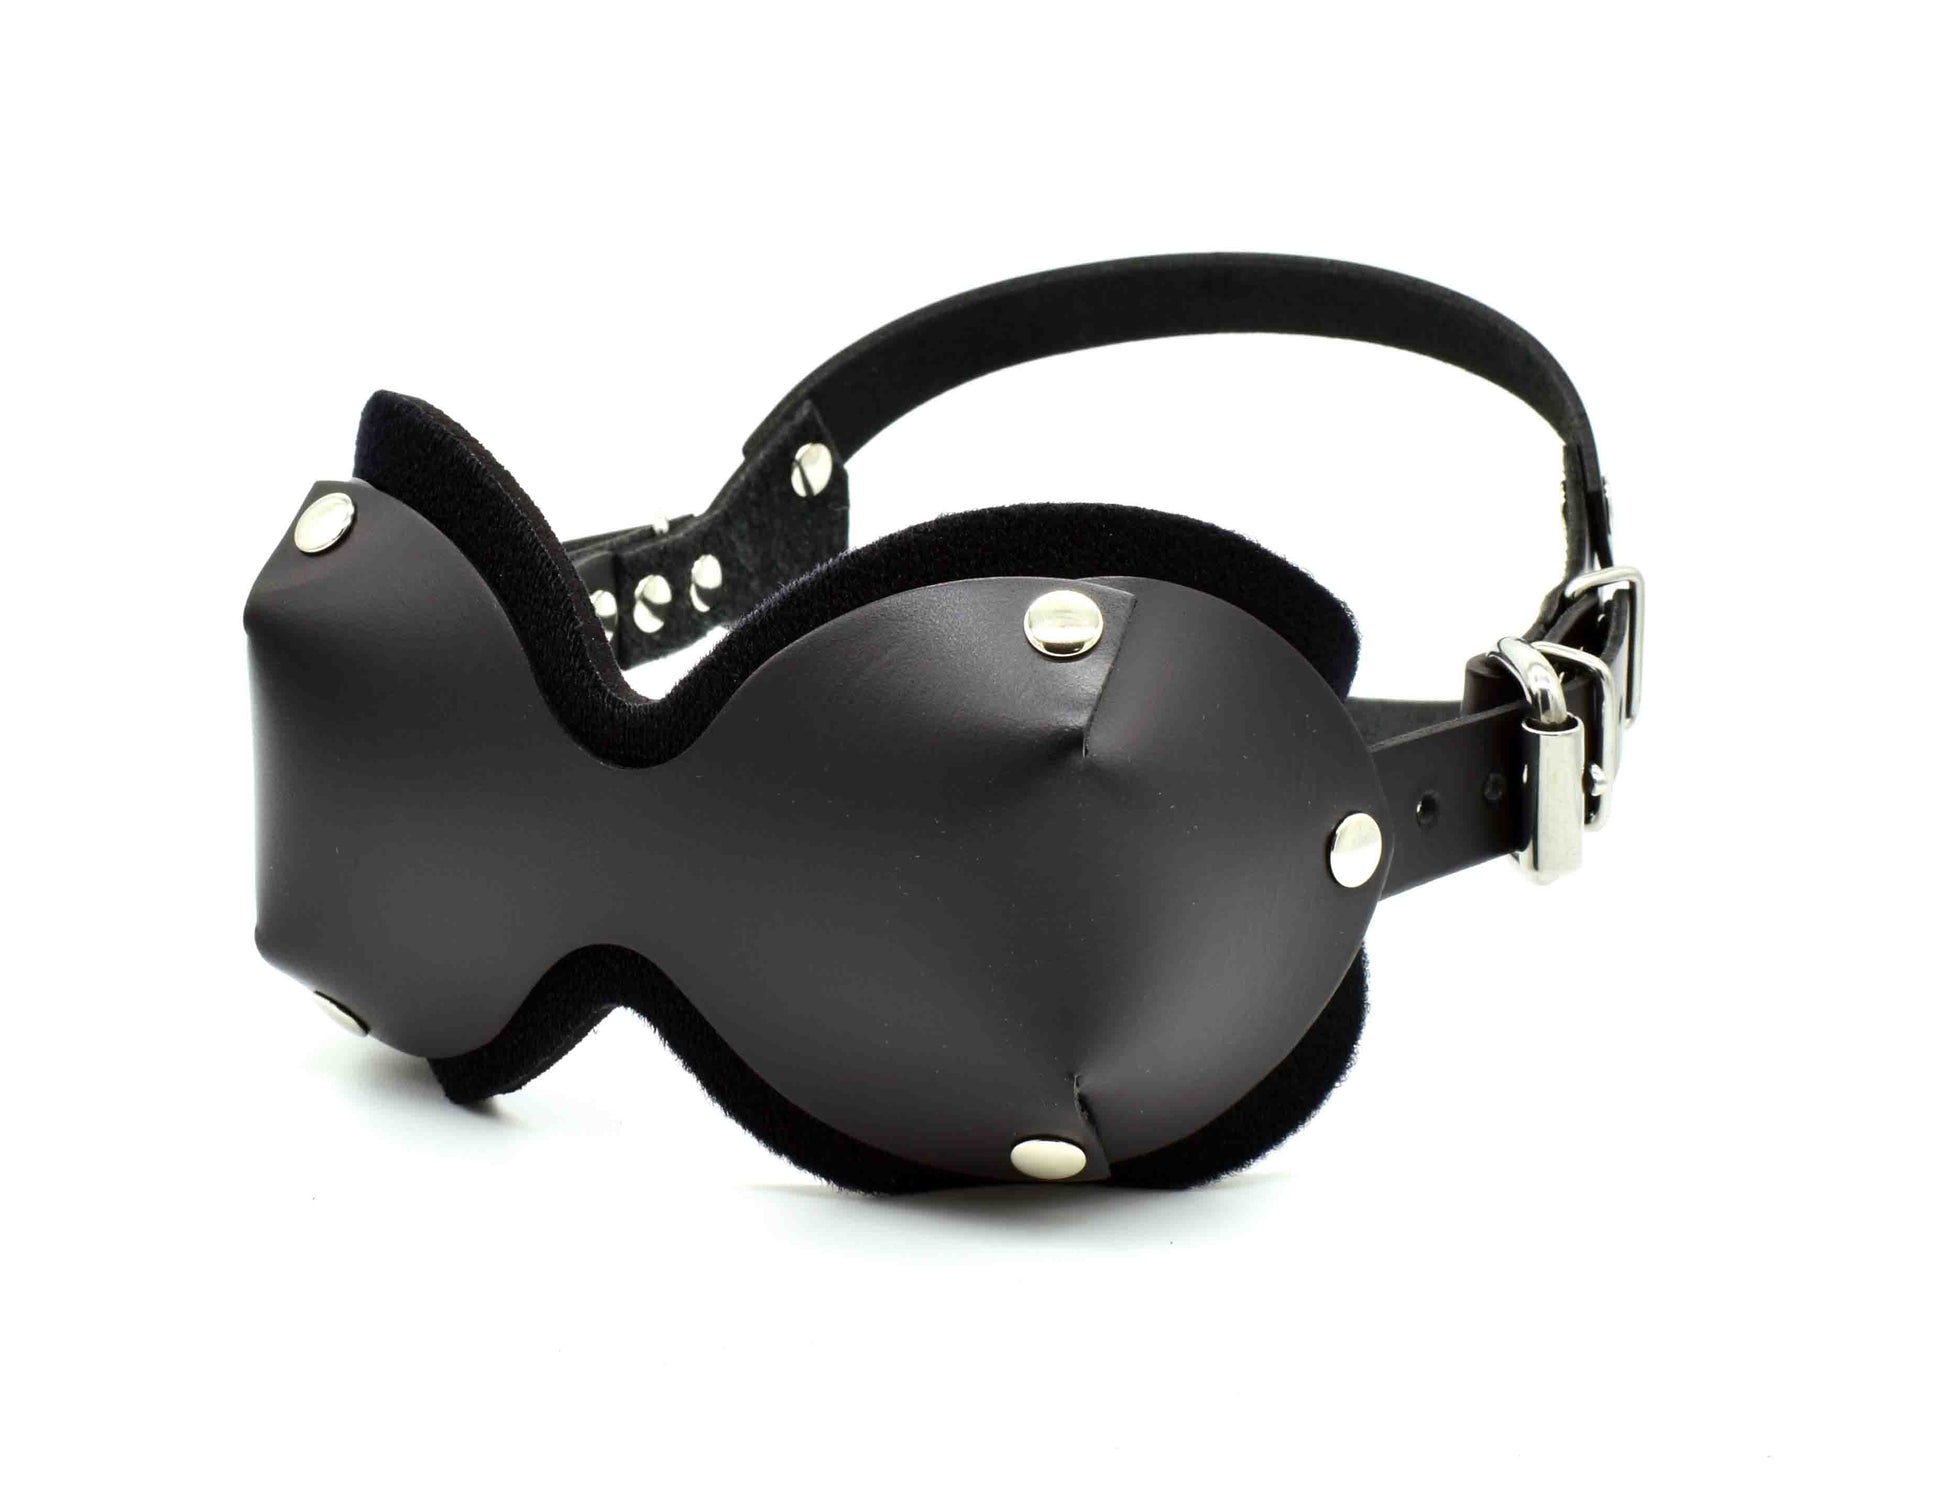 The leather Ultimate Blindfold, front and left side view.